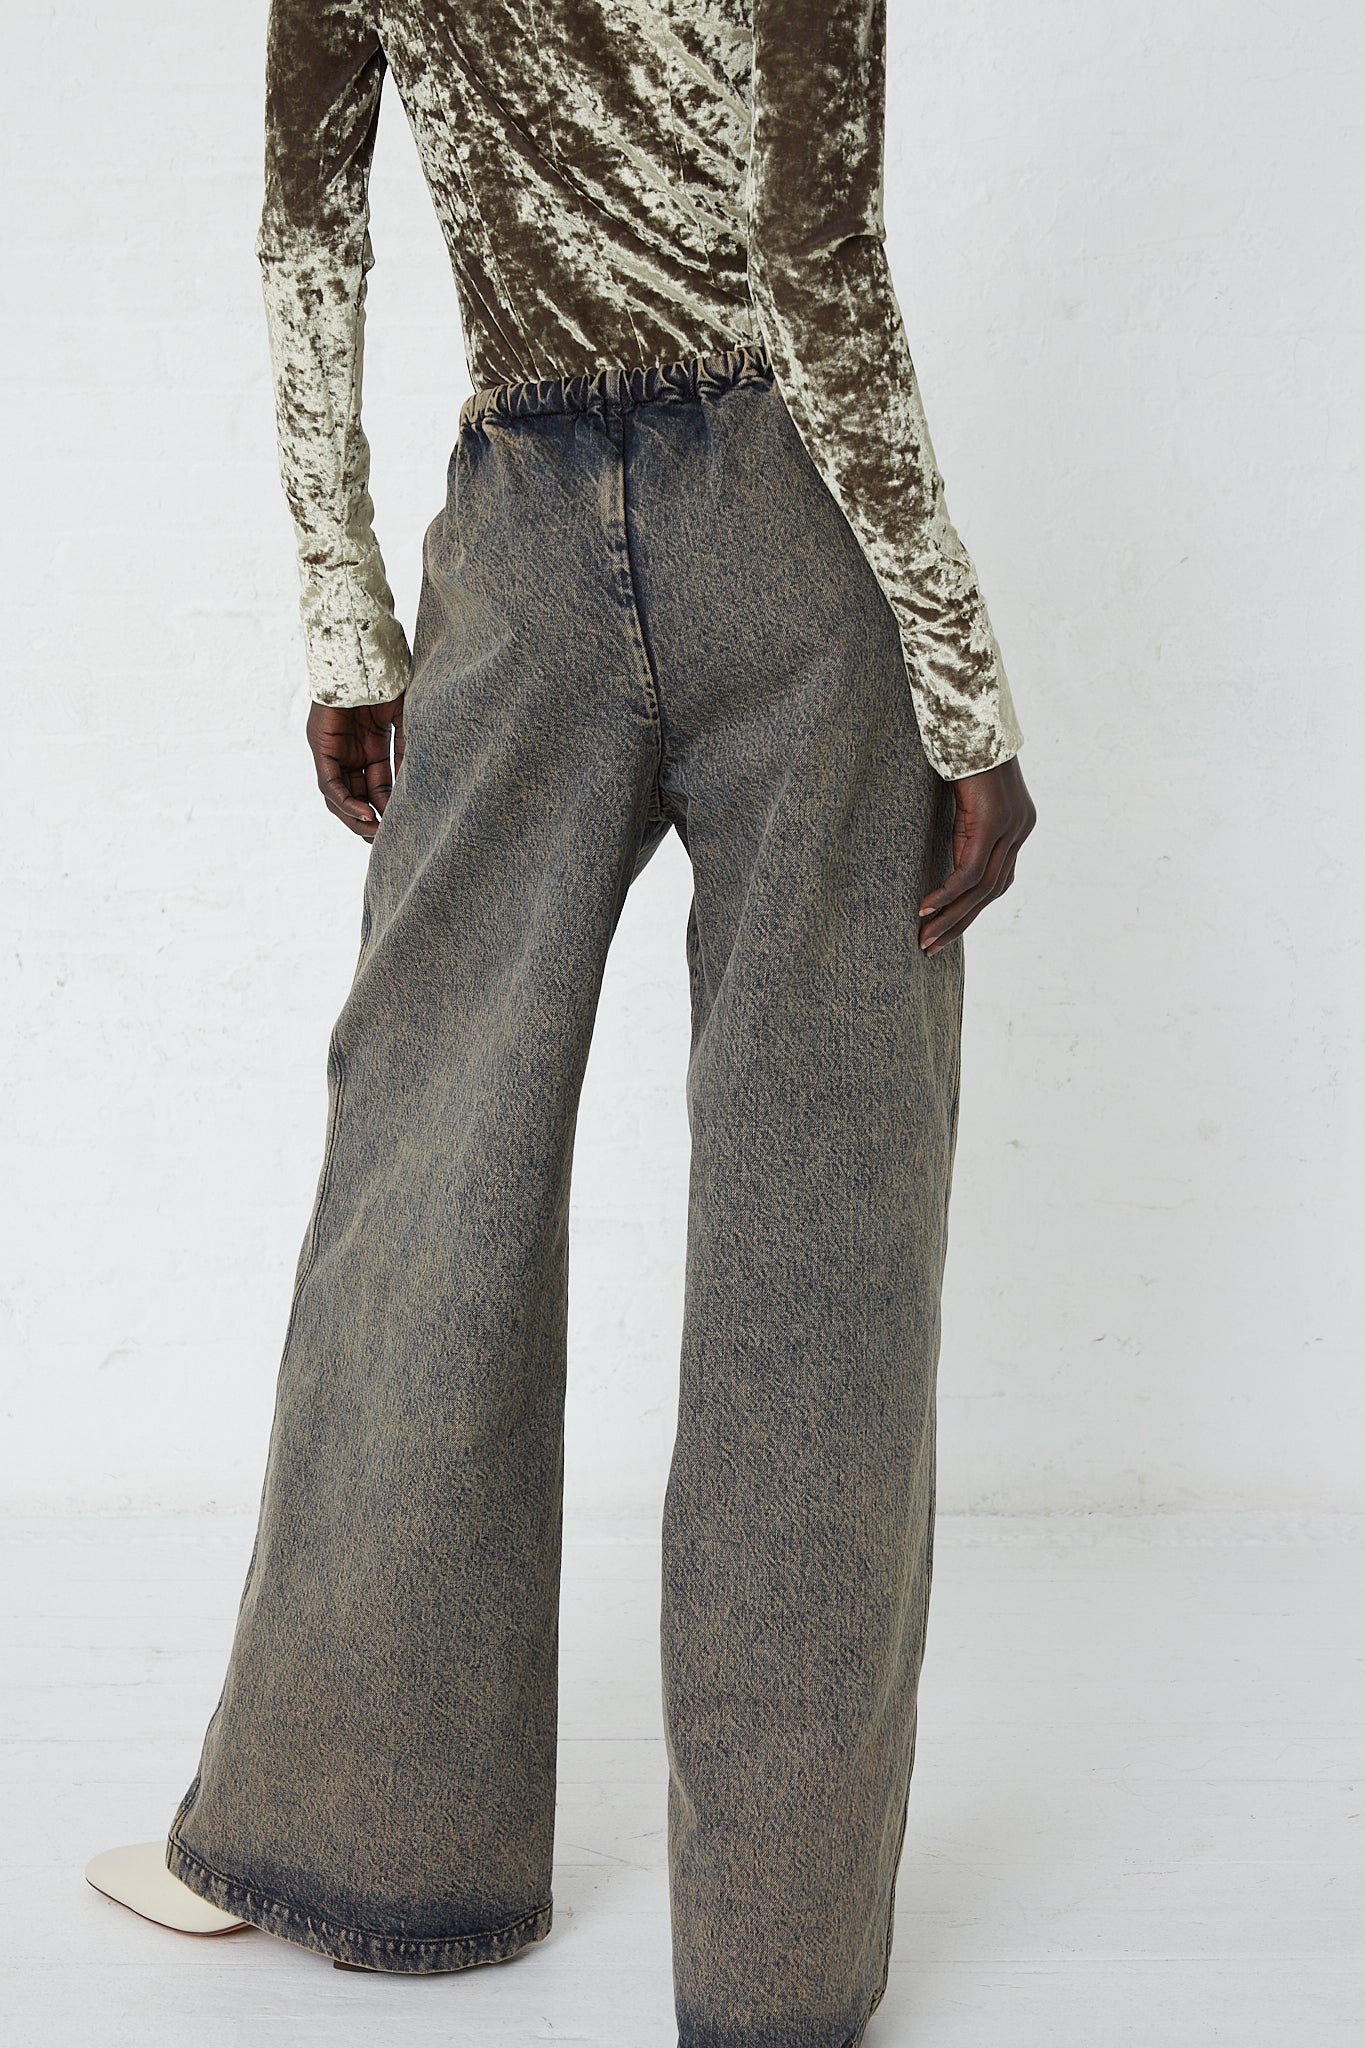 The back view of a woman rocking her Denim Belted Trousers in Acid Wash Denim by Veronique Leroy.